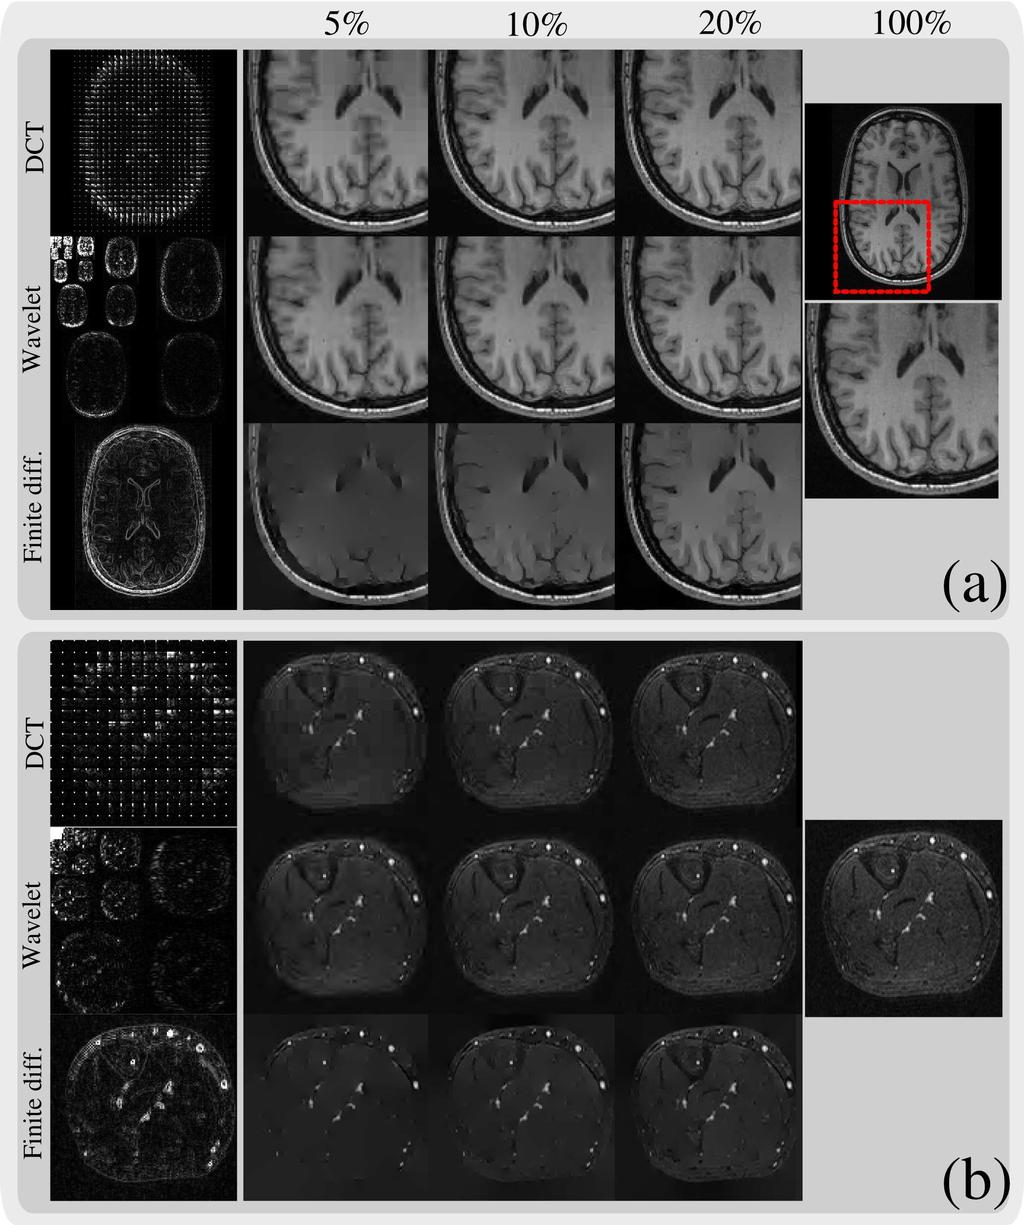 Figure 3: Transform-domain sparsity of images. (a) axial T 1 weighted brain image; (b) axial 3D contrast enhanced angiogram of the peripheral leg.